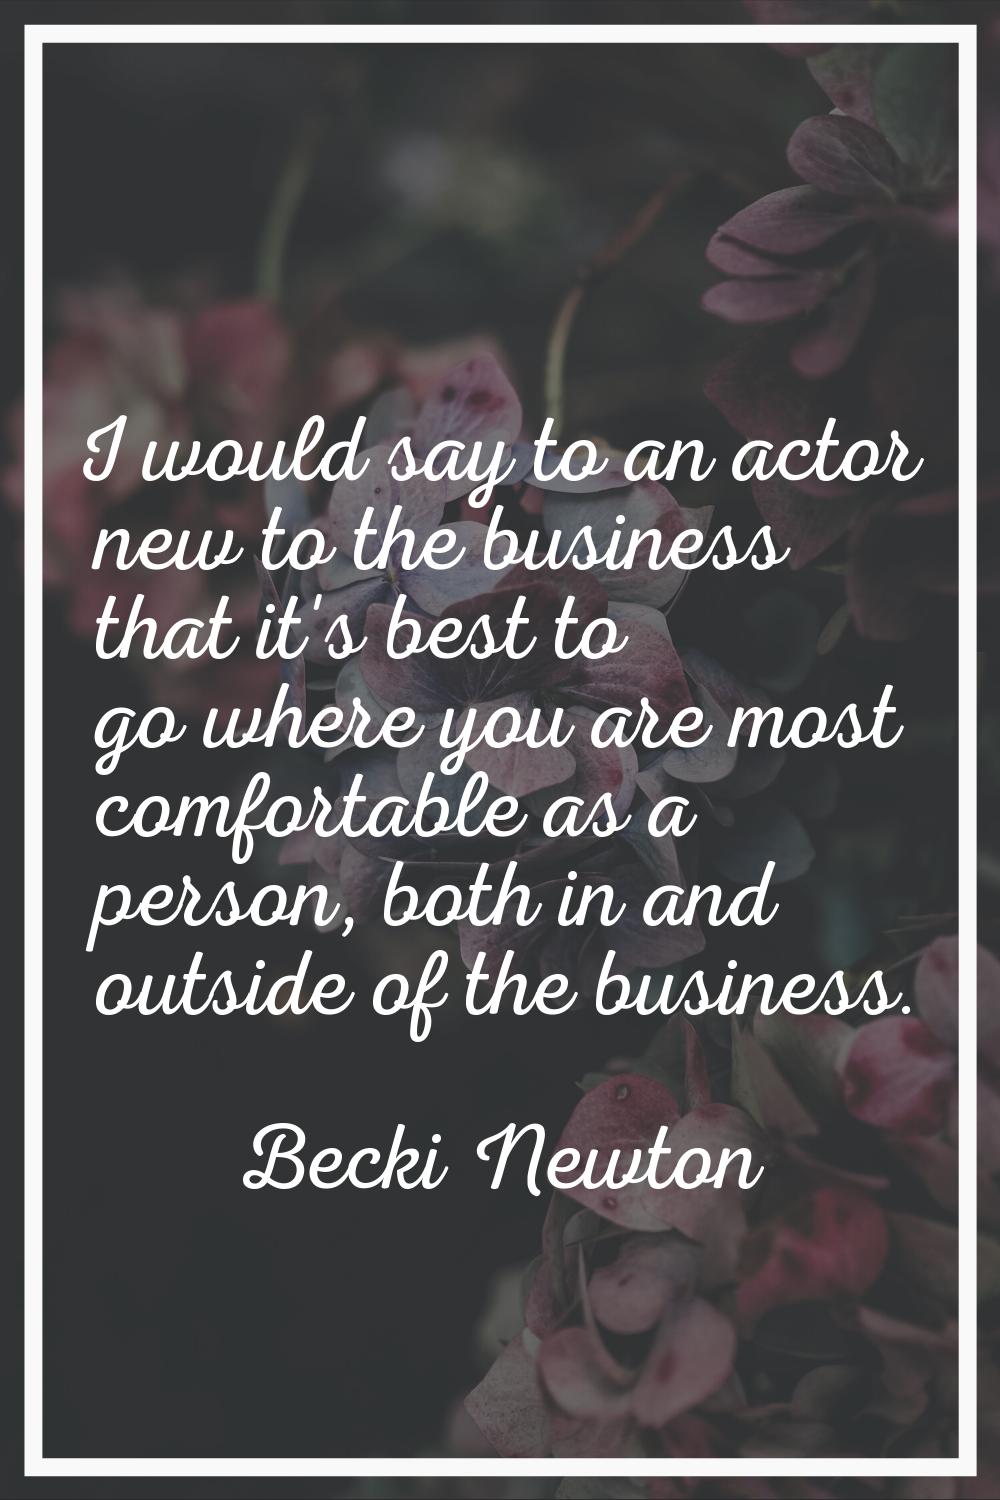 I would say to an actor new to the business that it's best to go where you are most comfortable as 